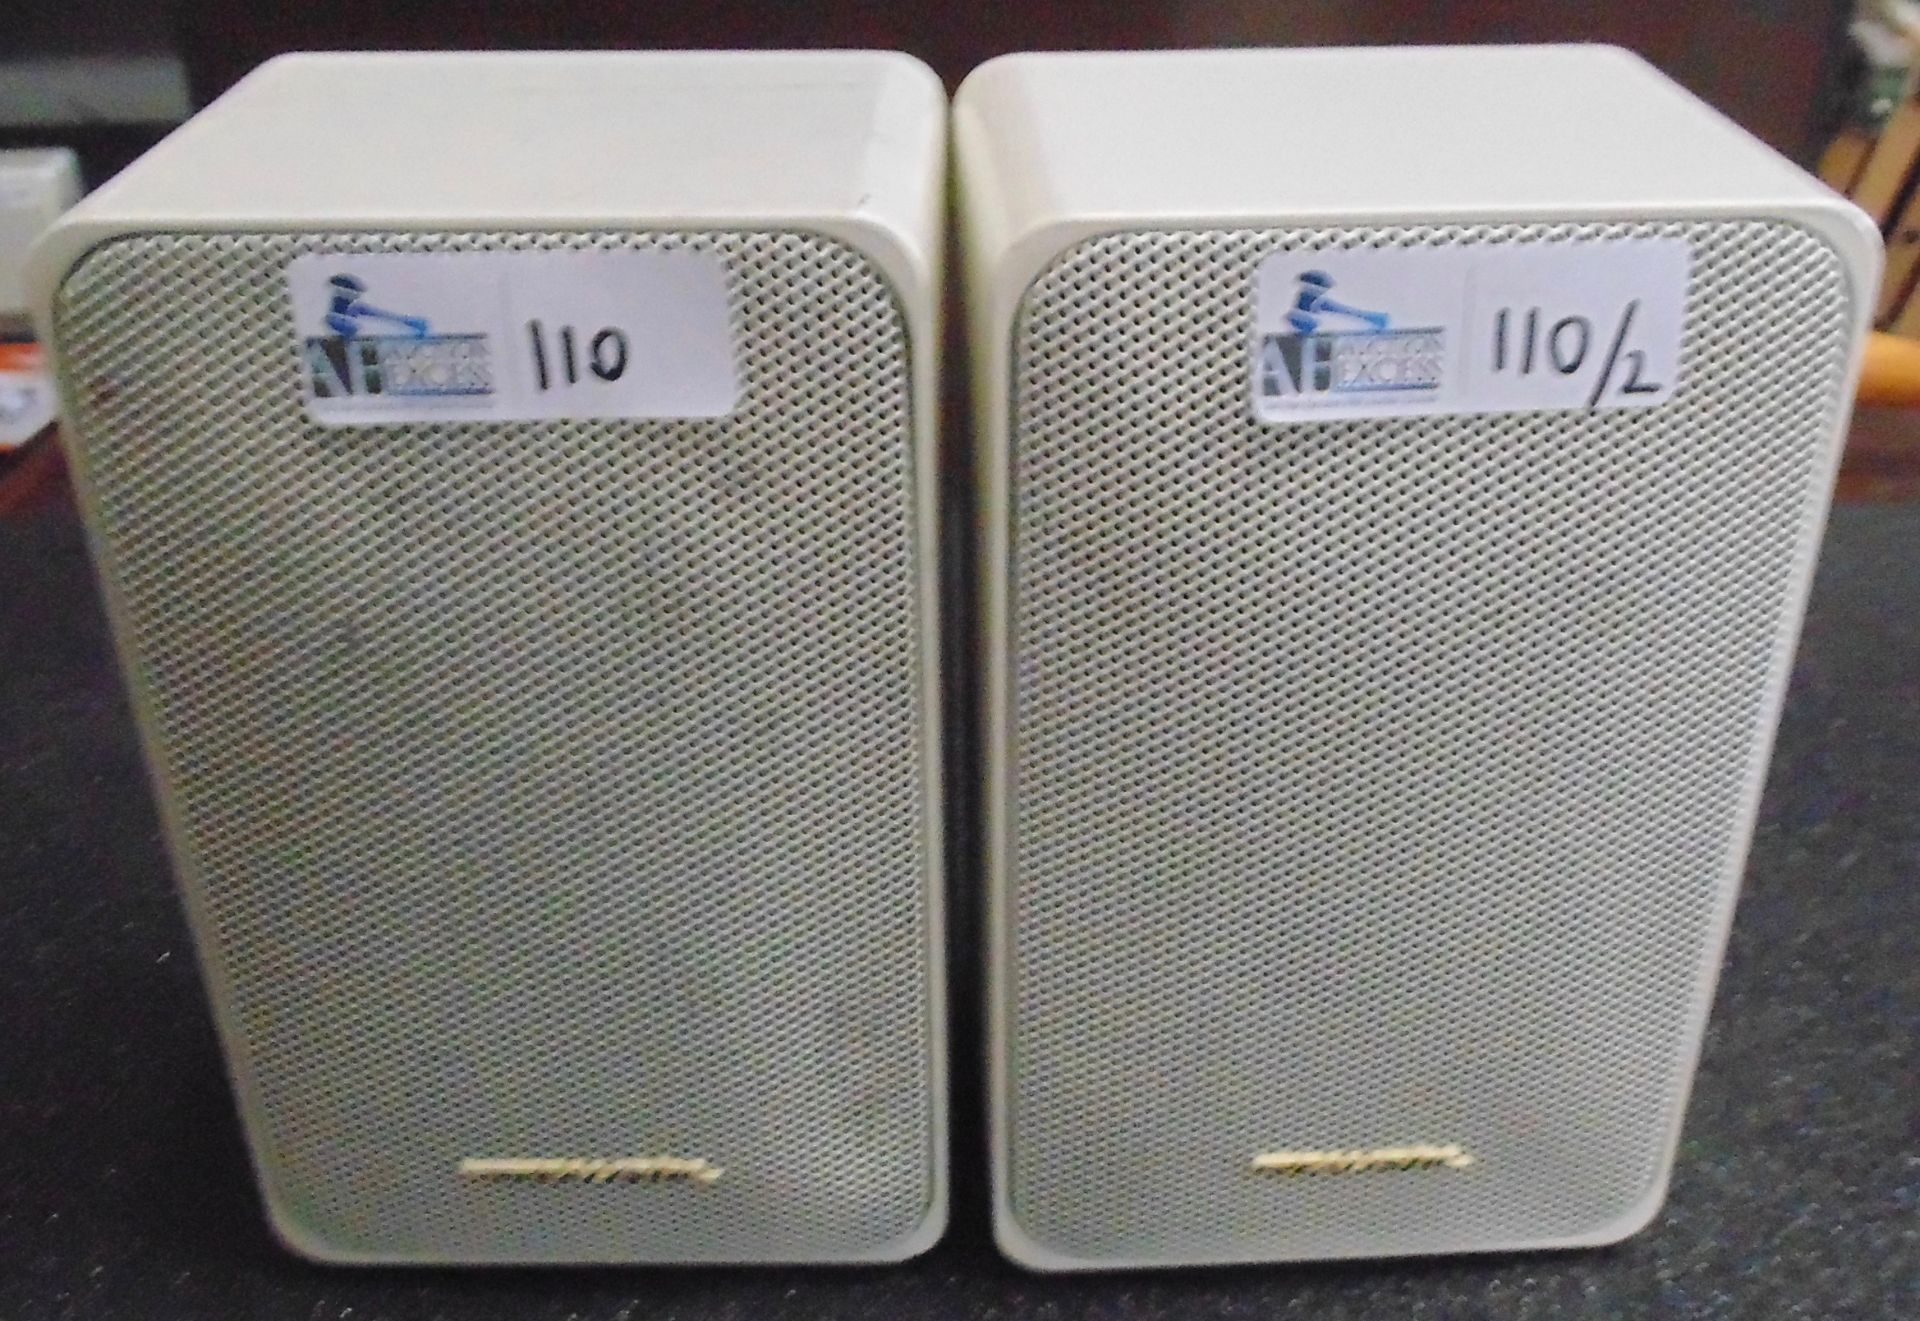 LOT OF 2 REALISTIC SPEAKERS